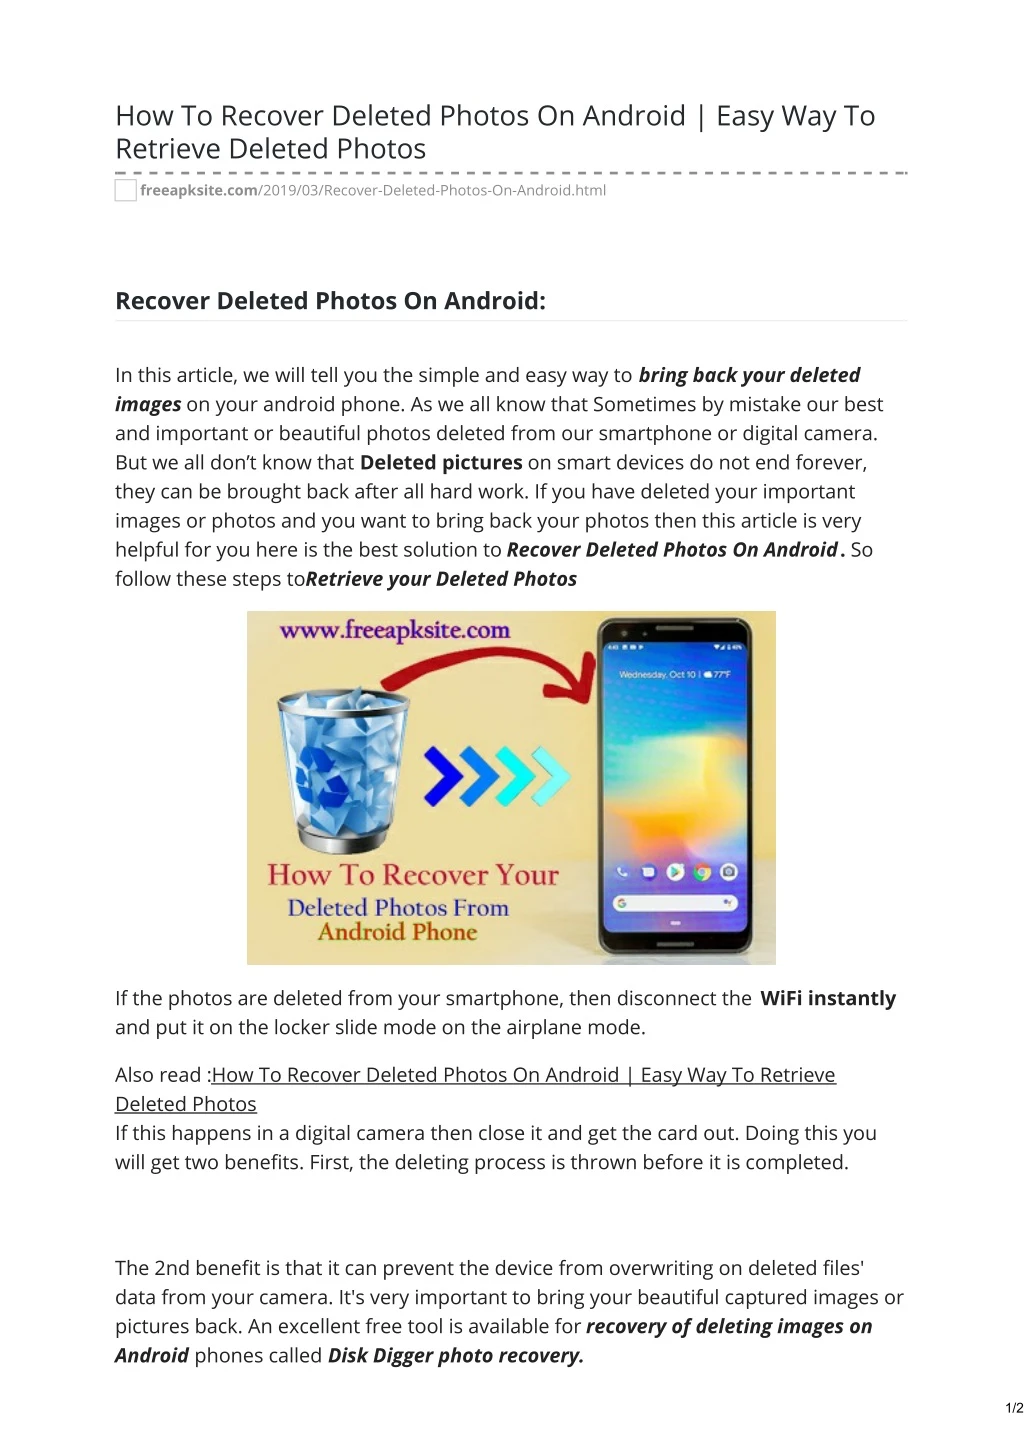 how to recover deleted photos on android easy